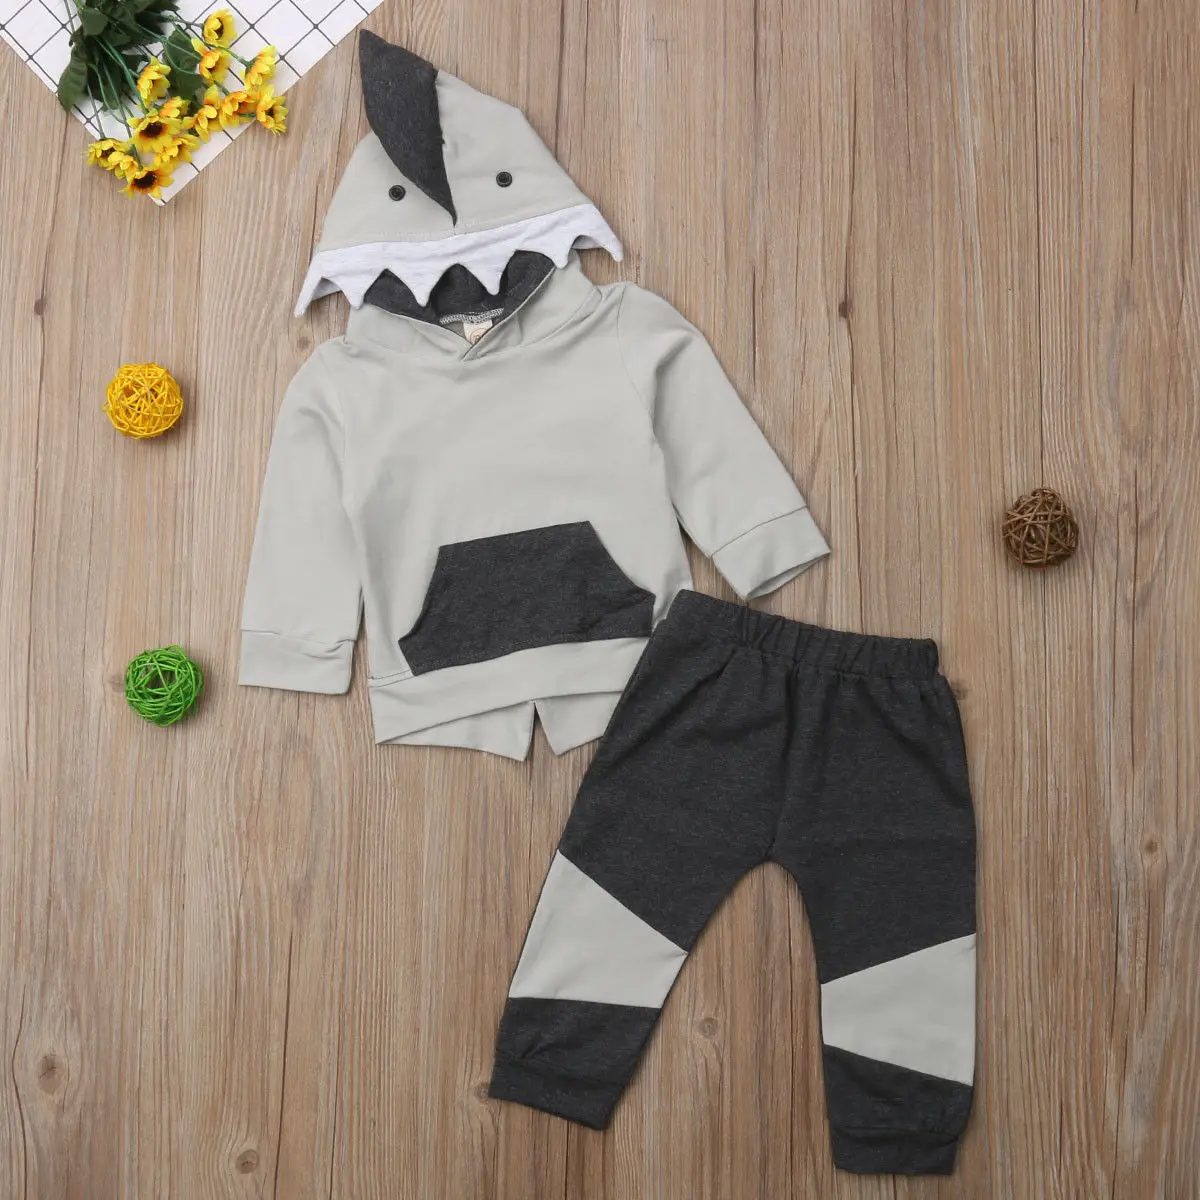 Baby Boys 2PCs Hooded Clothes Sets Babies Hoodie Top Pants Kids Outfits Infant Newborn Shark Clothing Set 0-4T